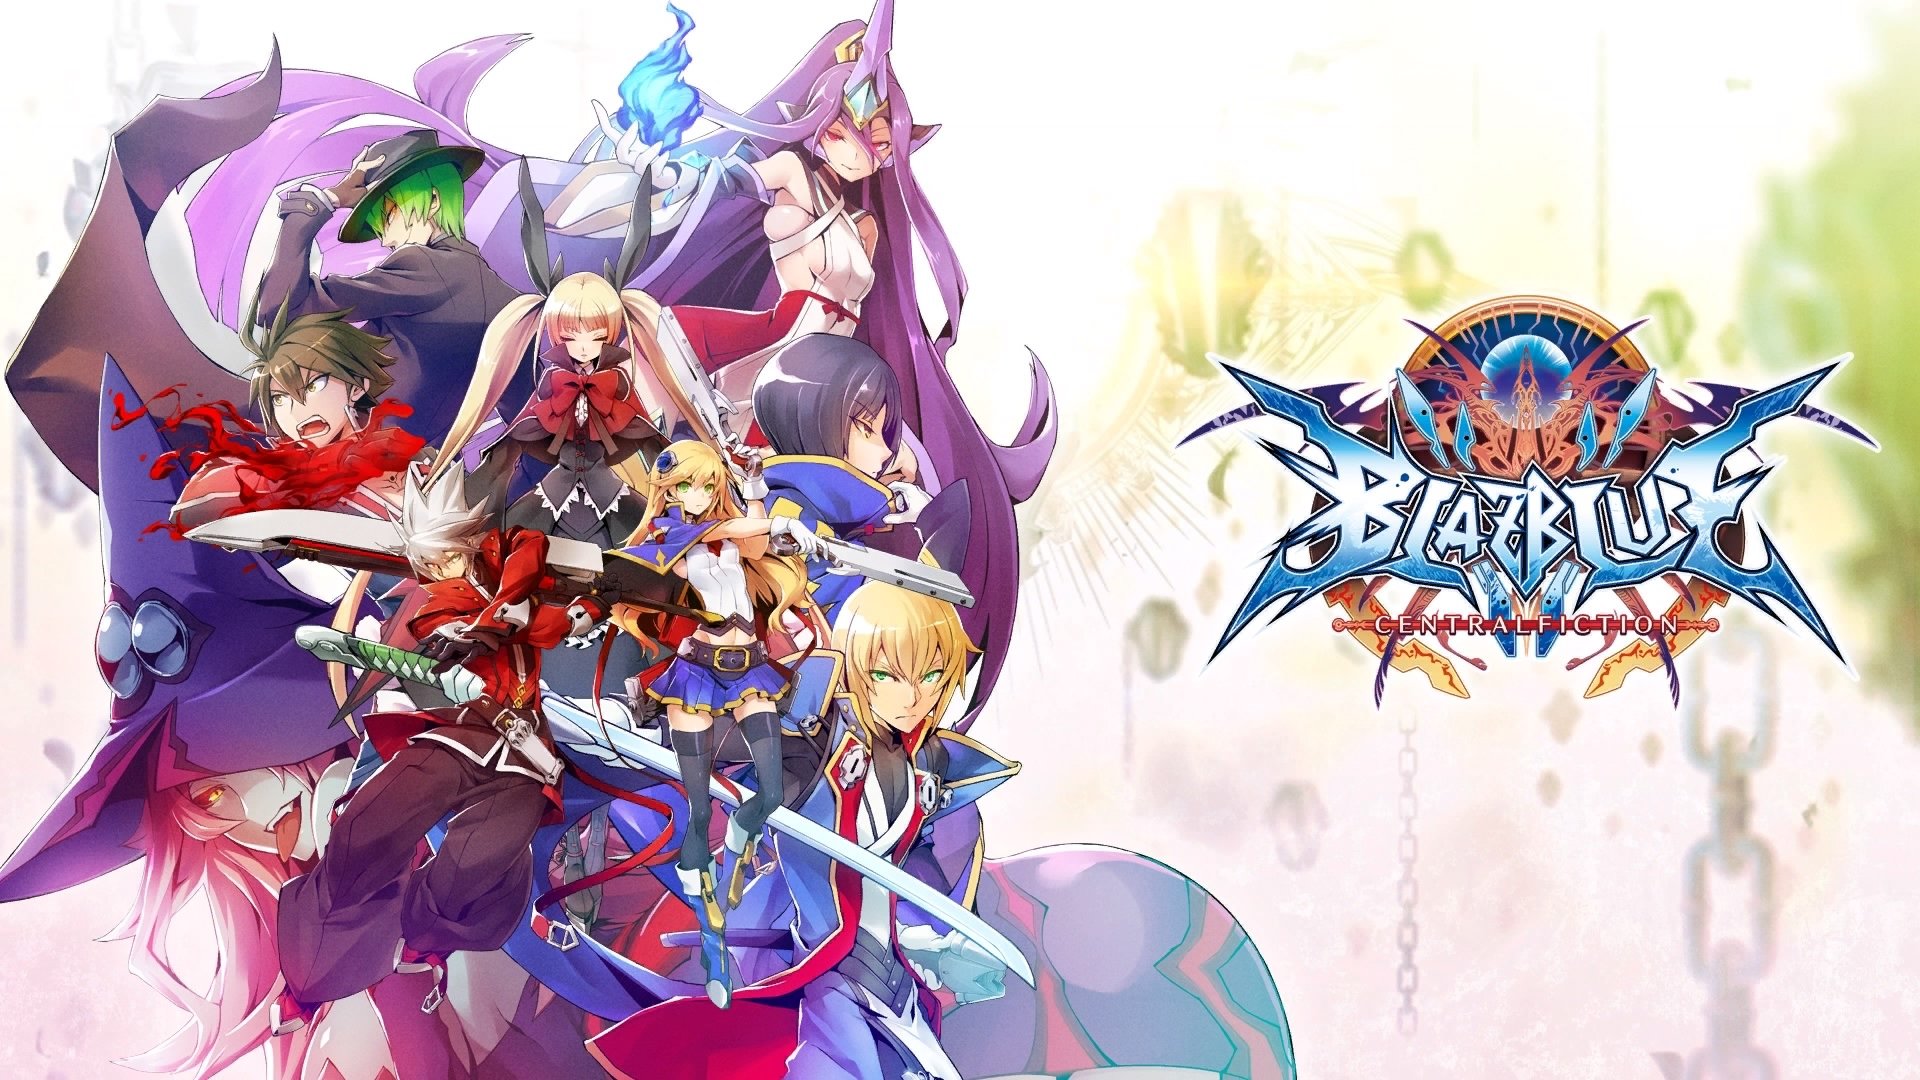 18 Blazblue Centralfiction Hd Wallpapers Background Images